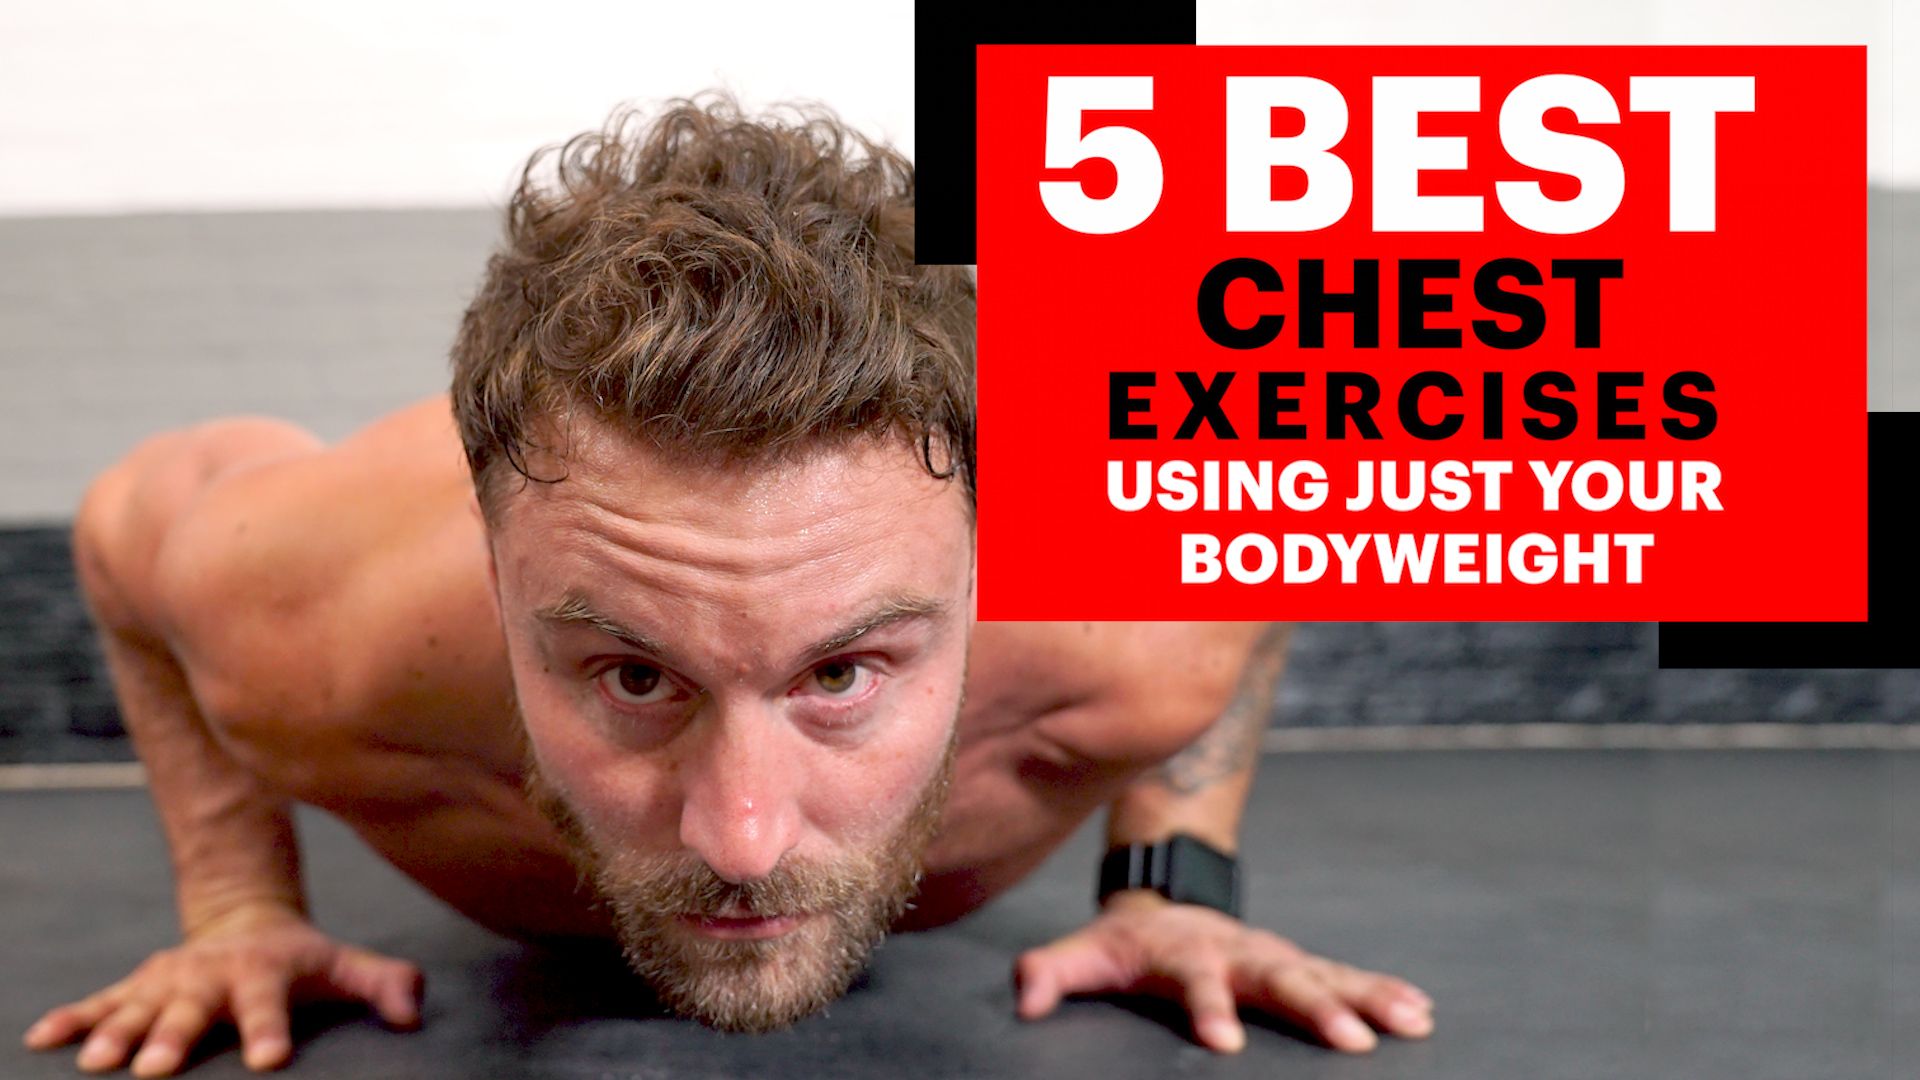 5 At-Home Chest Exercises to Tighten Up The Chest